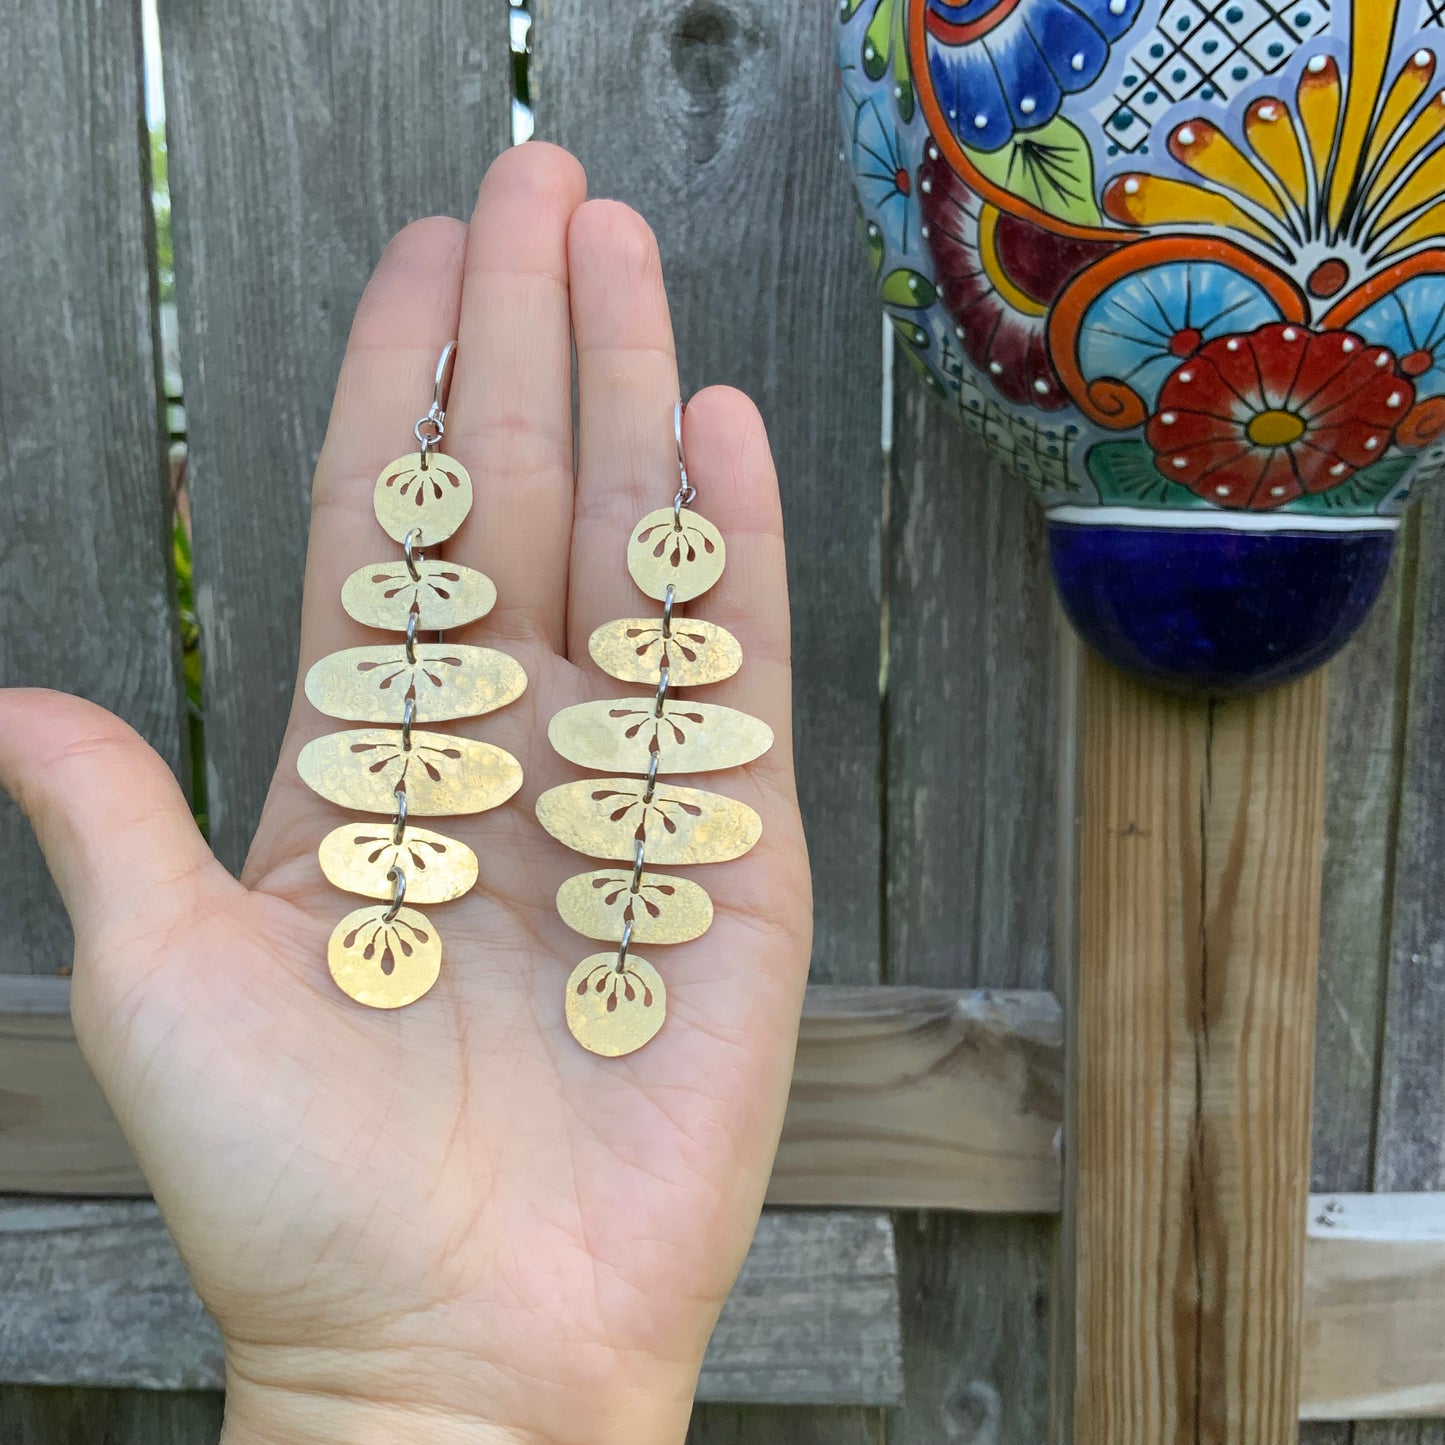 Floral Folklore River Rock drop earrings, hammered brass floral oval earrings